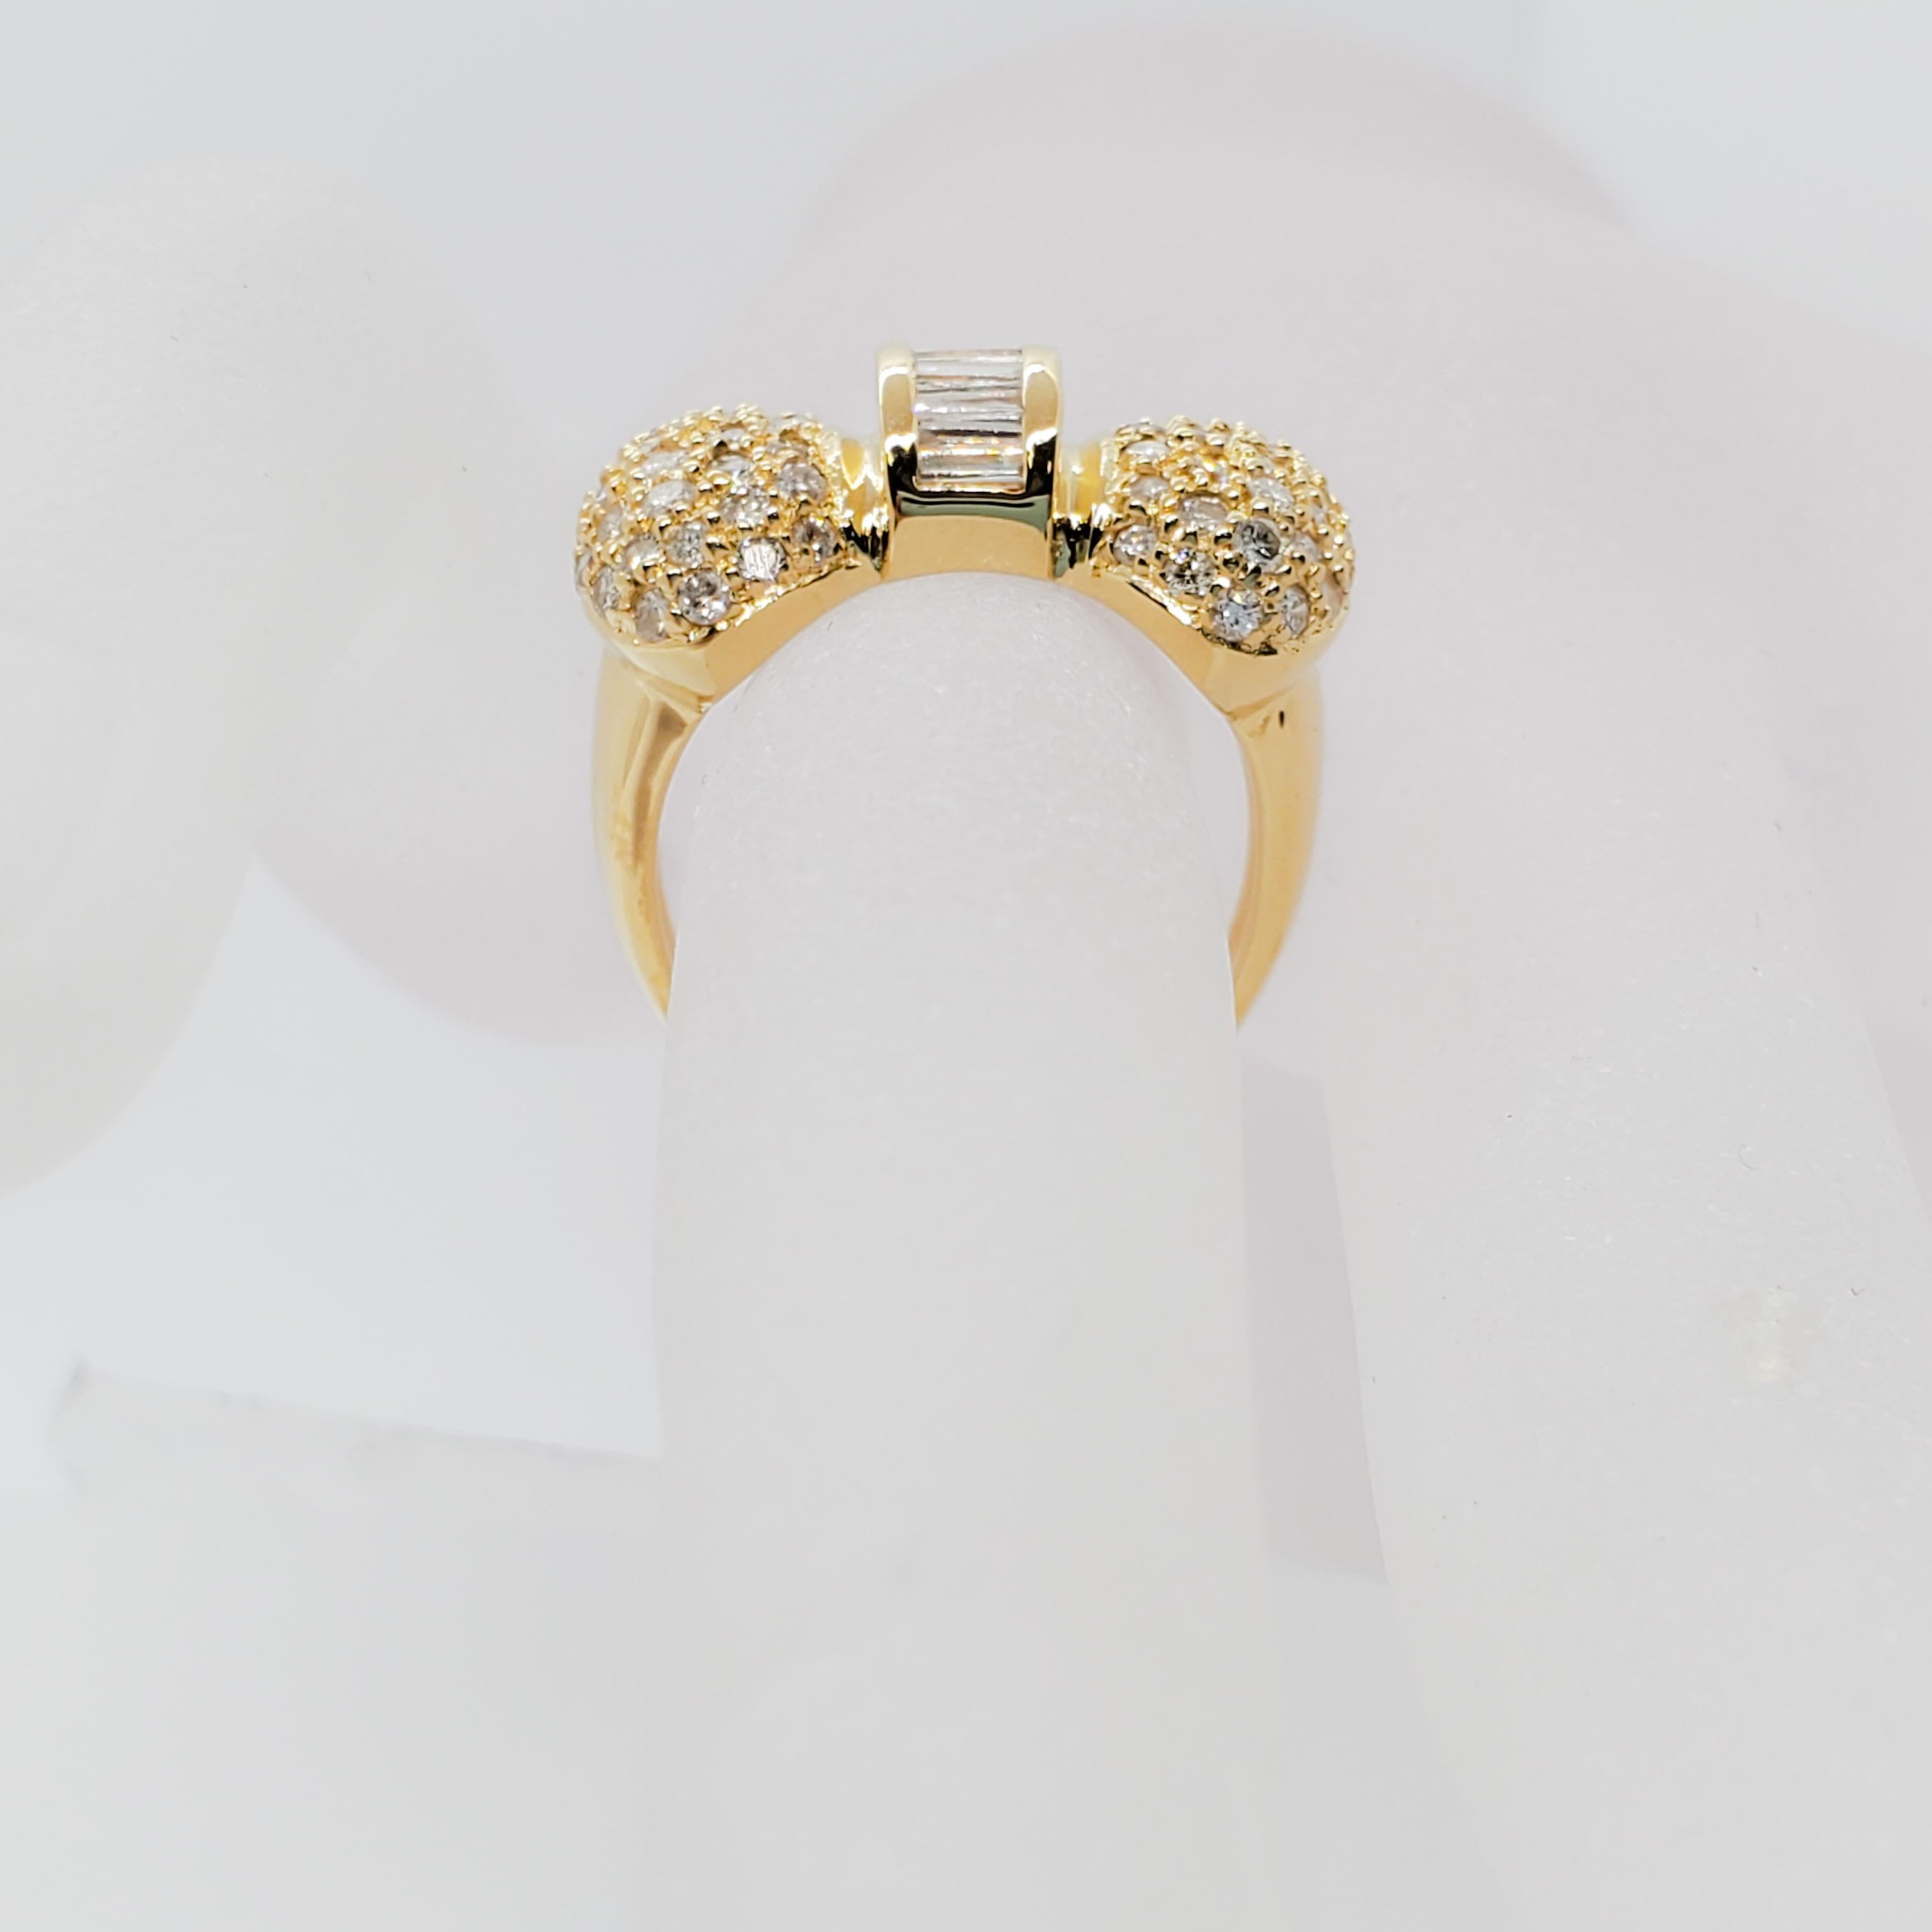 Women's or Men's White Diamond Baguette and Round Bow Design Ring in 18 Karat Yellow Gold